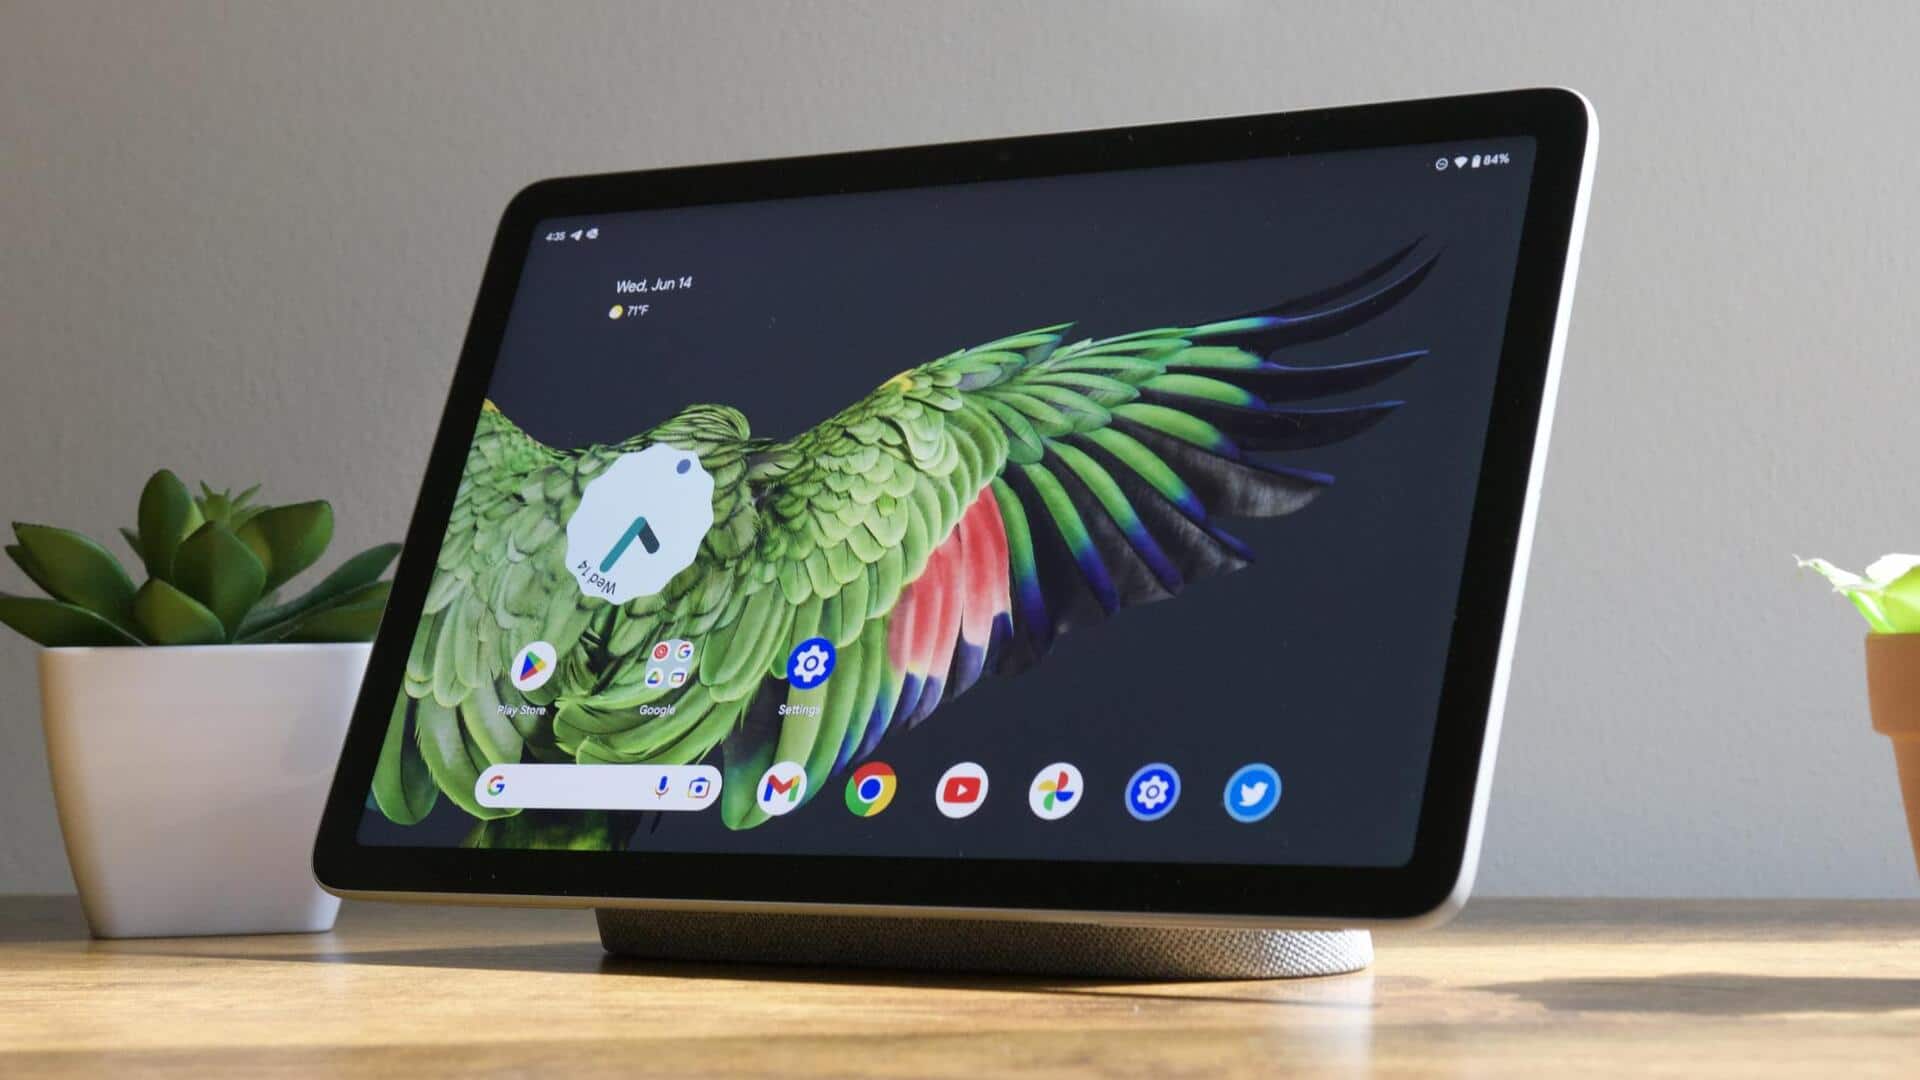 Google's Pixel Tablet faces criticism for lack of specialization